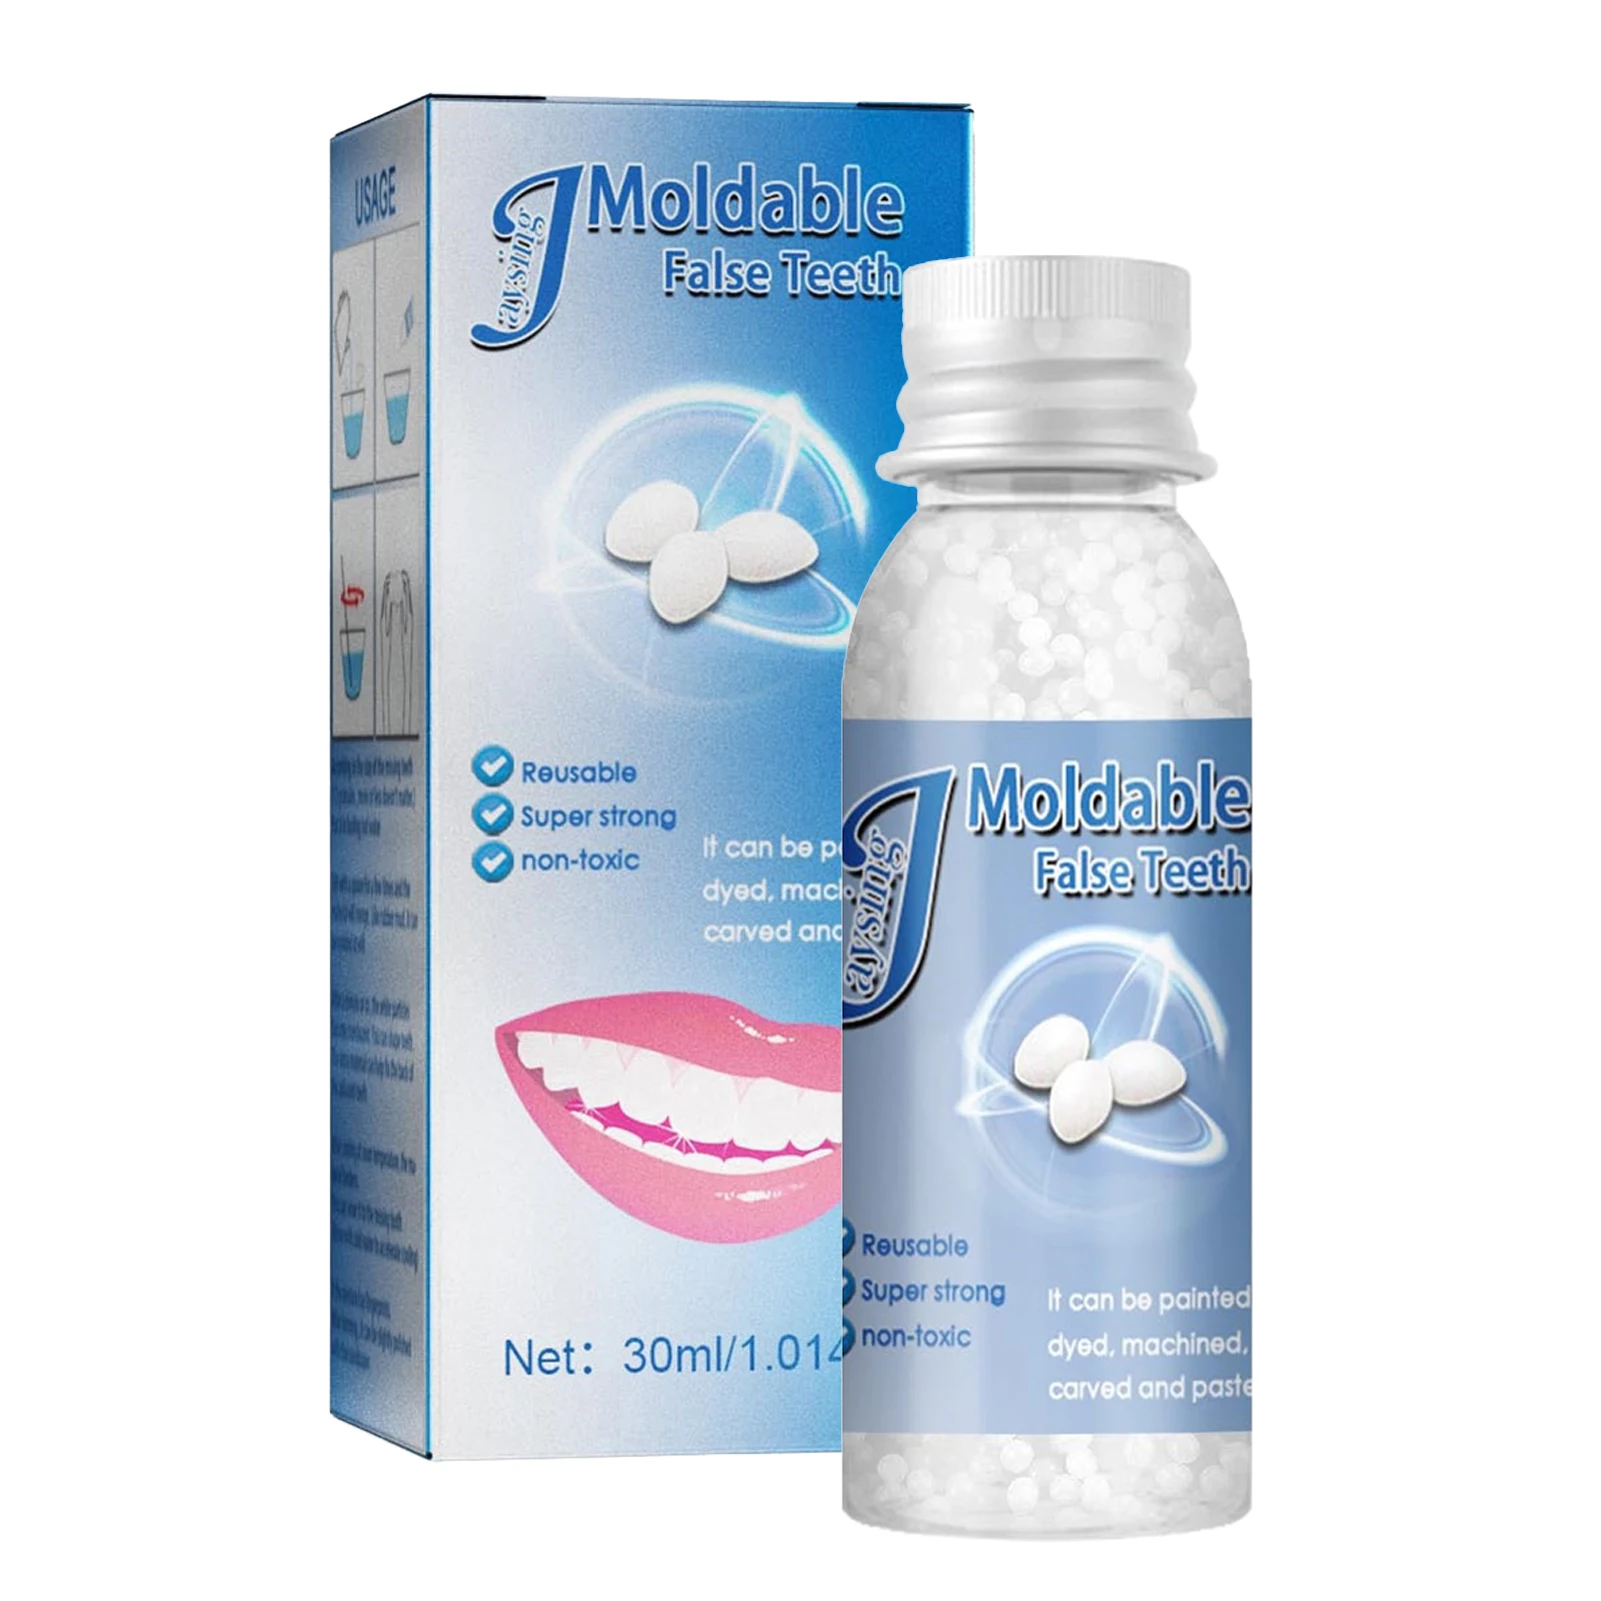 Moldable Teeth Repair Kit Temporary Dental Replacement Kit Moldable Thermal Beads For Filling The Missing And Broken Tooth Fake